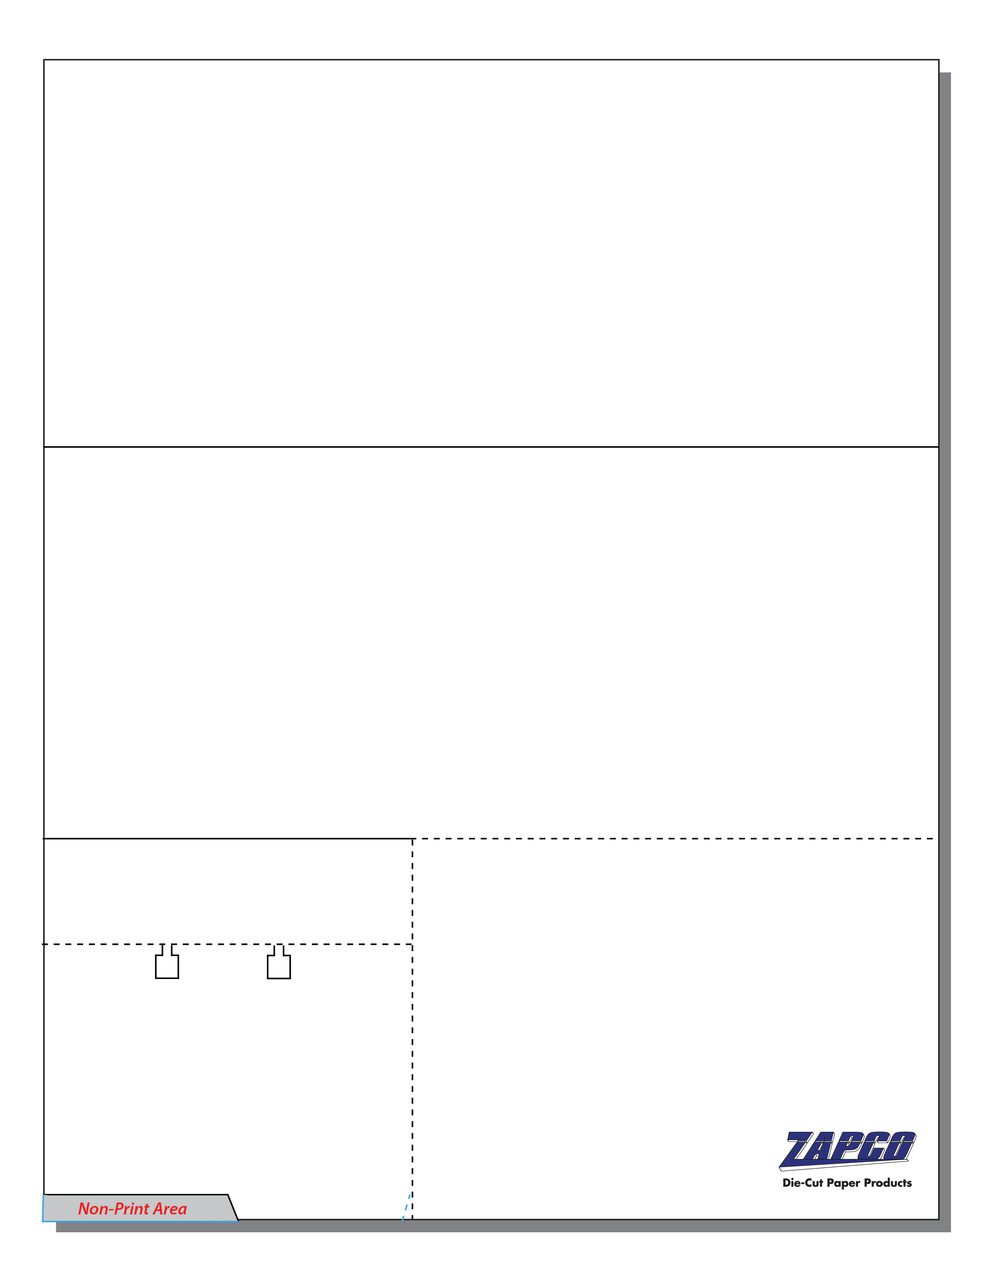 Item 123: 1-Up 8 1/2" x 11" Mailer with Post Card & Rotary File Card 8 1/2" x 11" Sheet(250 Sheets)